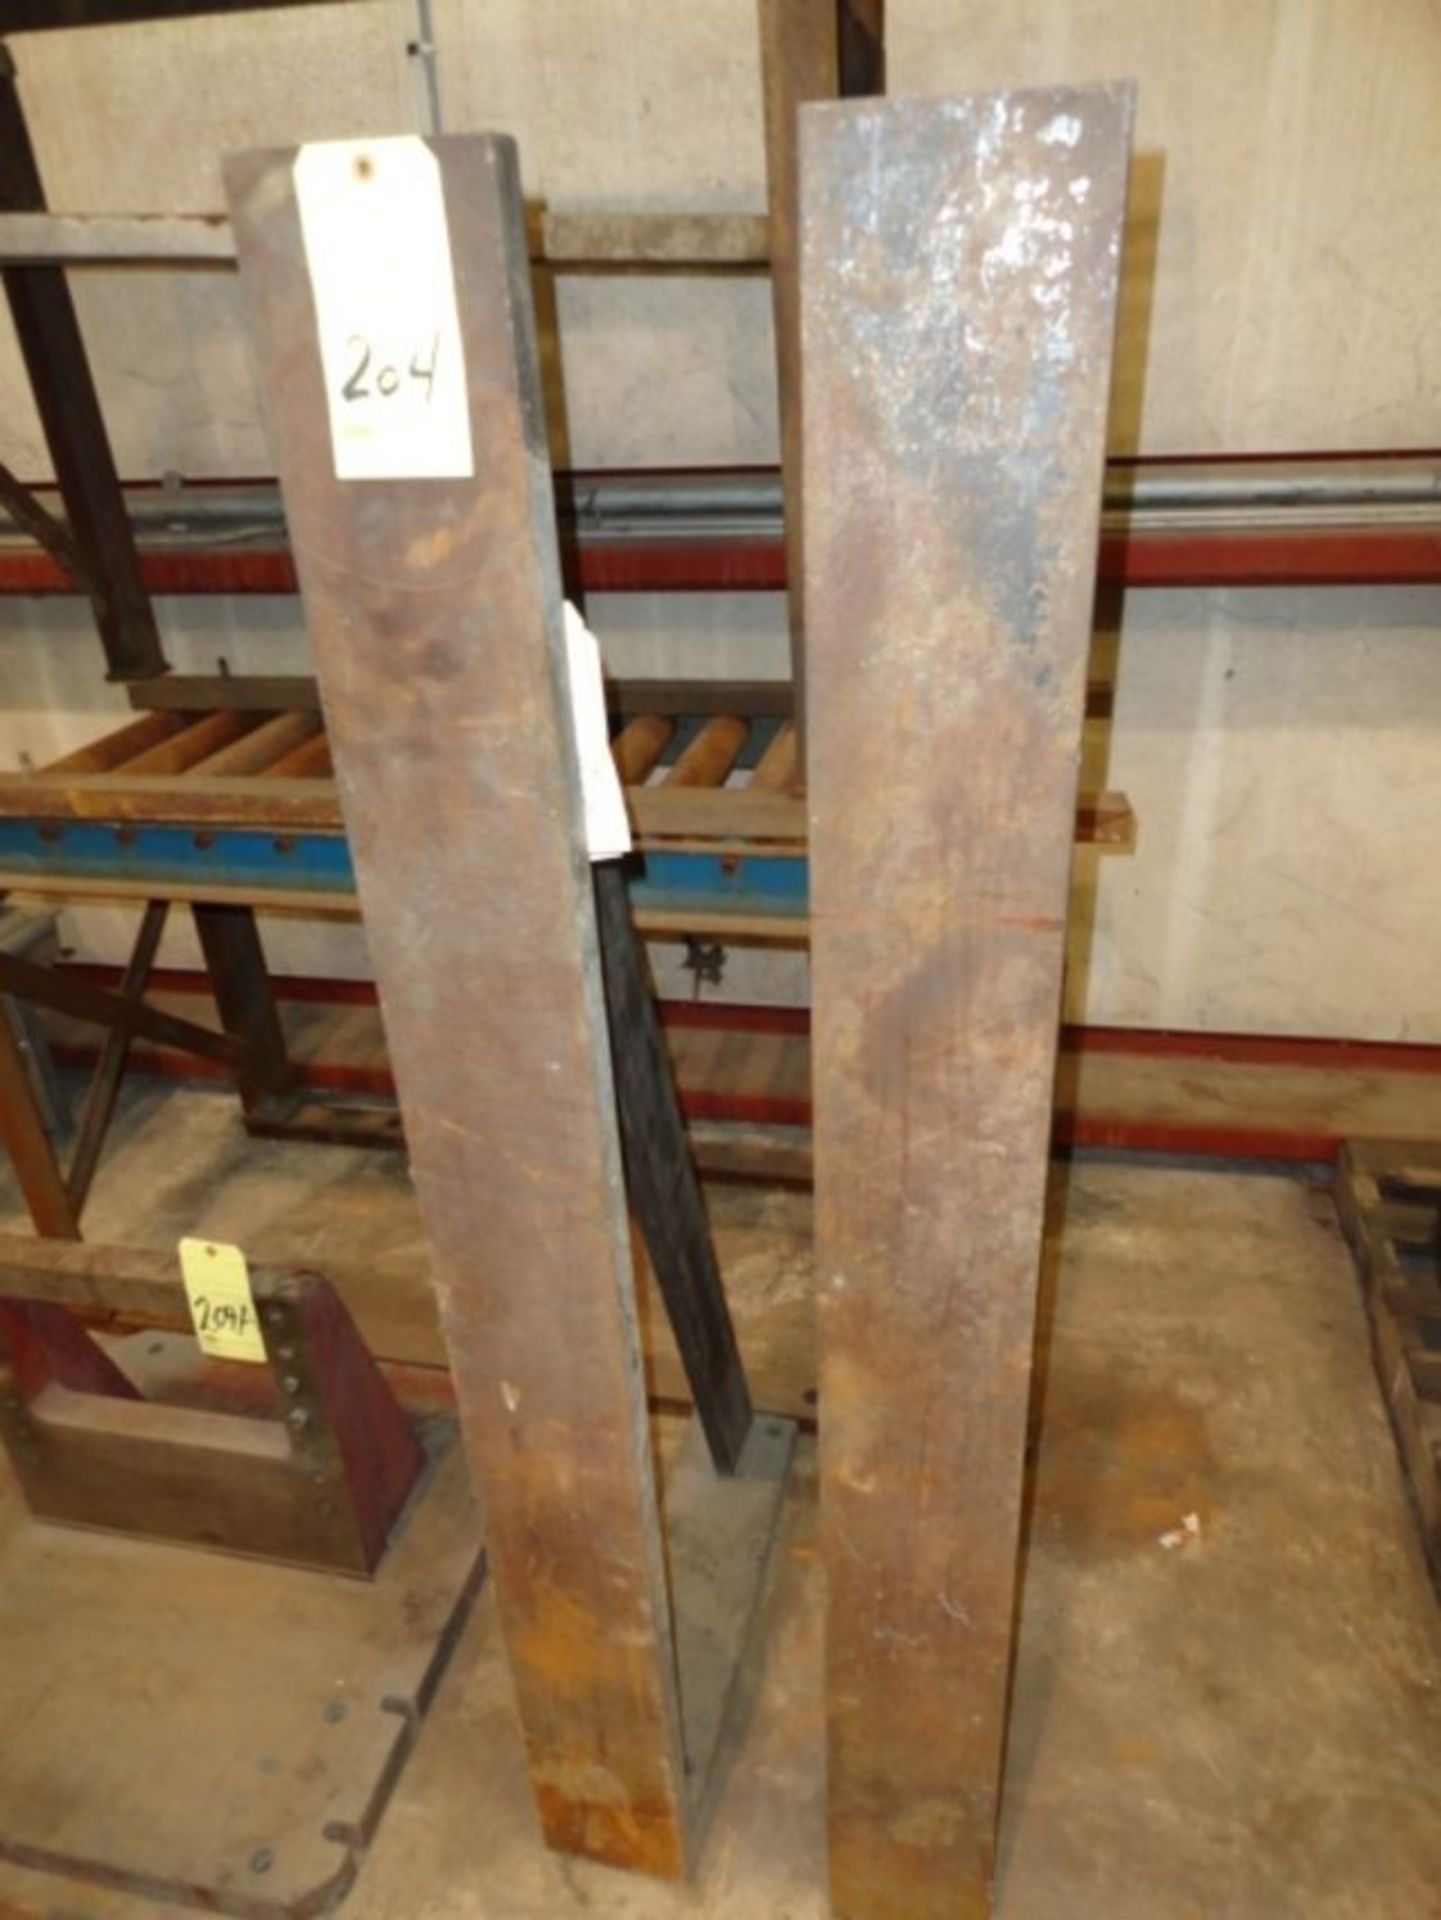 LOT OF ANGLE PLATES (1 pair), 24” x 6” x 60”, 1-3/8” face thickness - Image 2 of 2